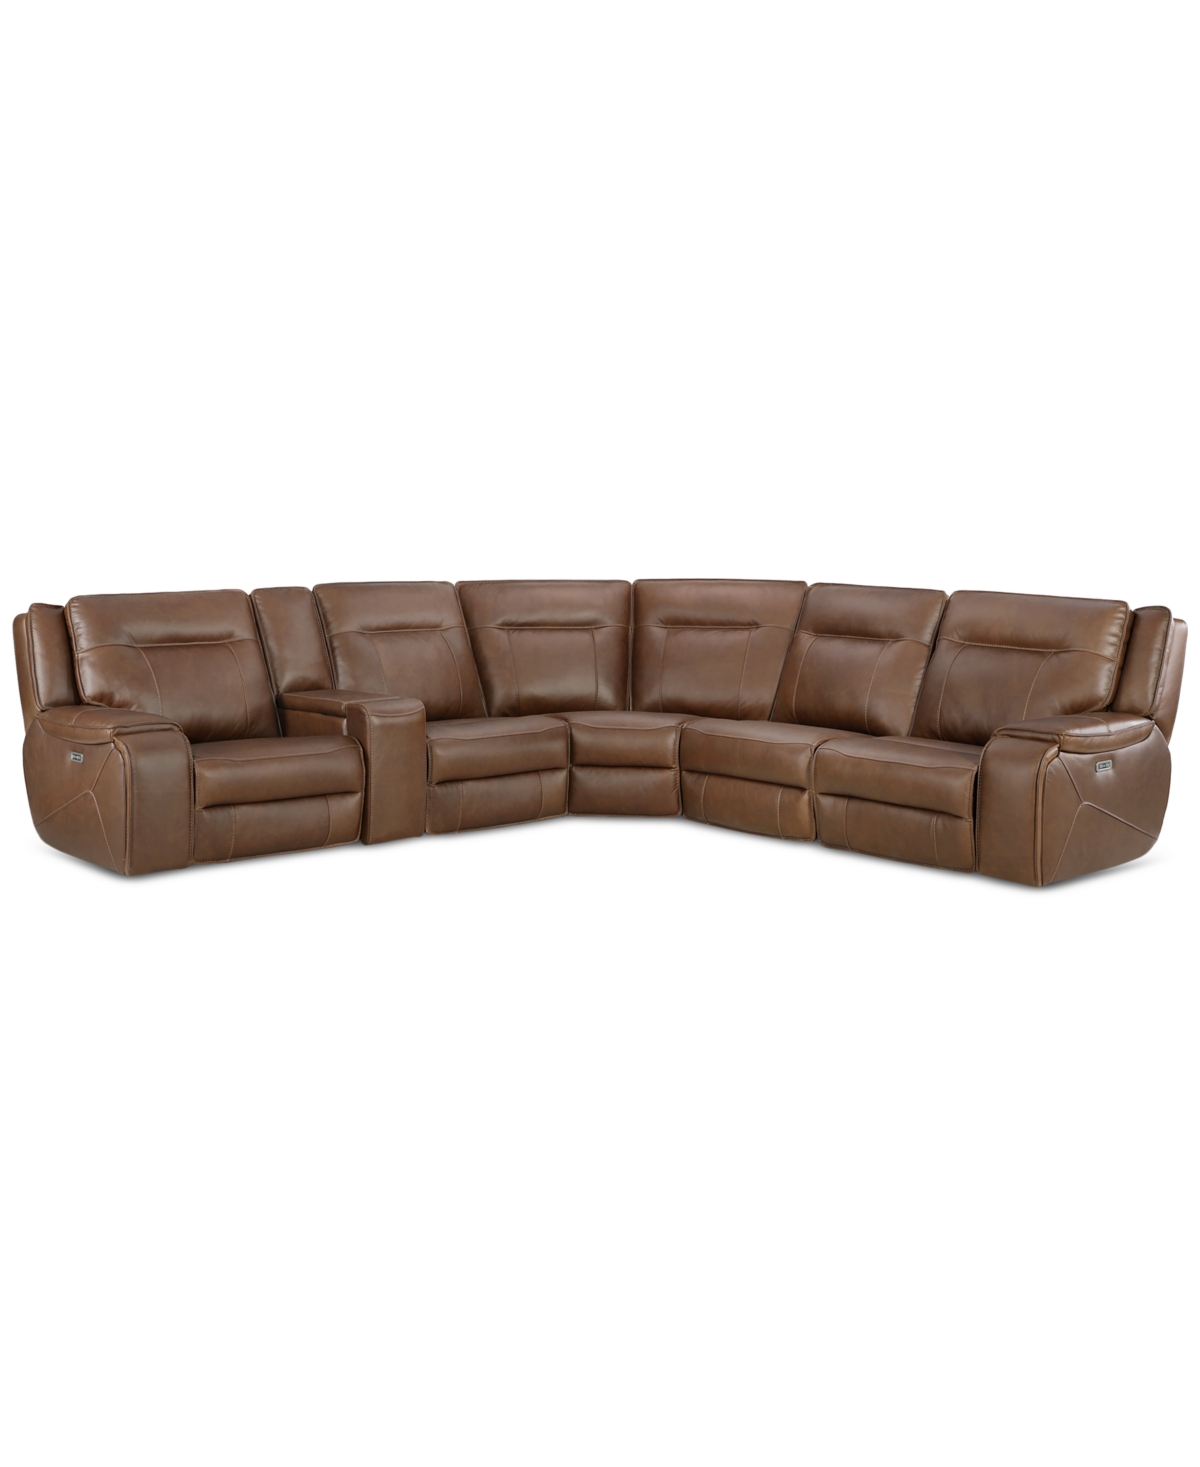 Macy's Hansley 6-pc Zero Gravity Leather Sectional With 3 Power Recliners, Created For  In Brown